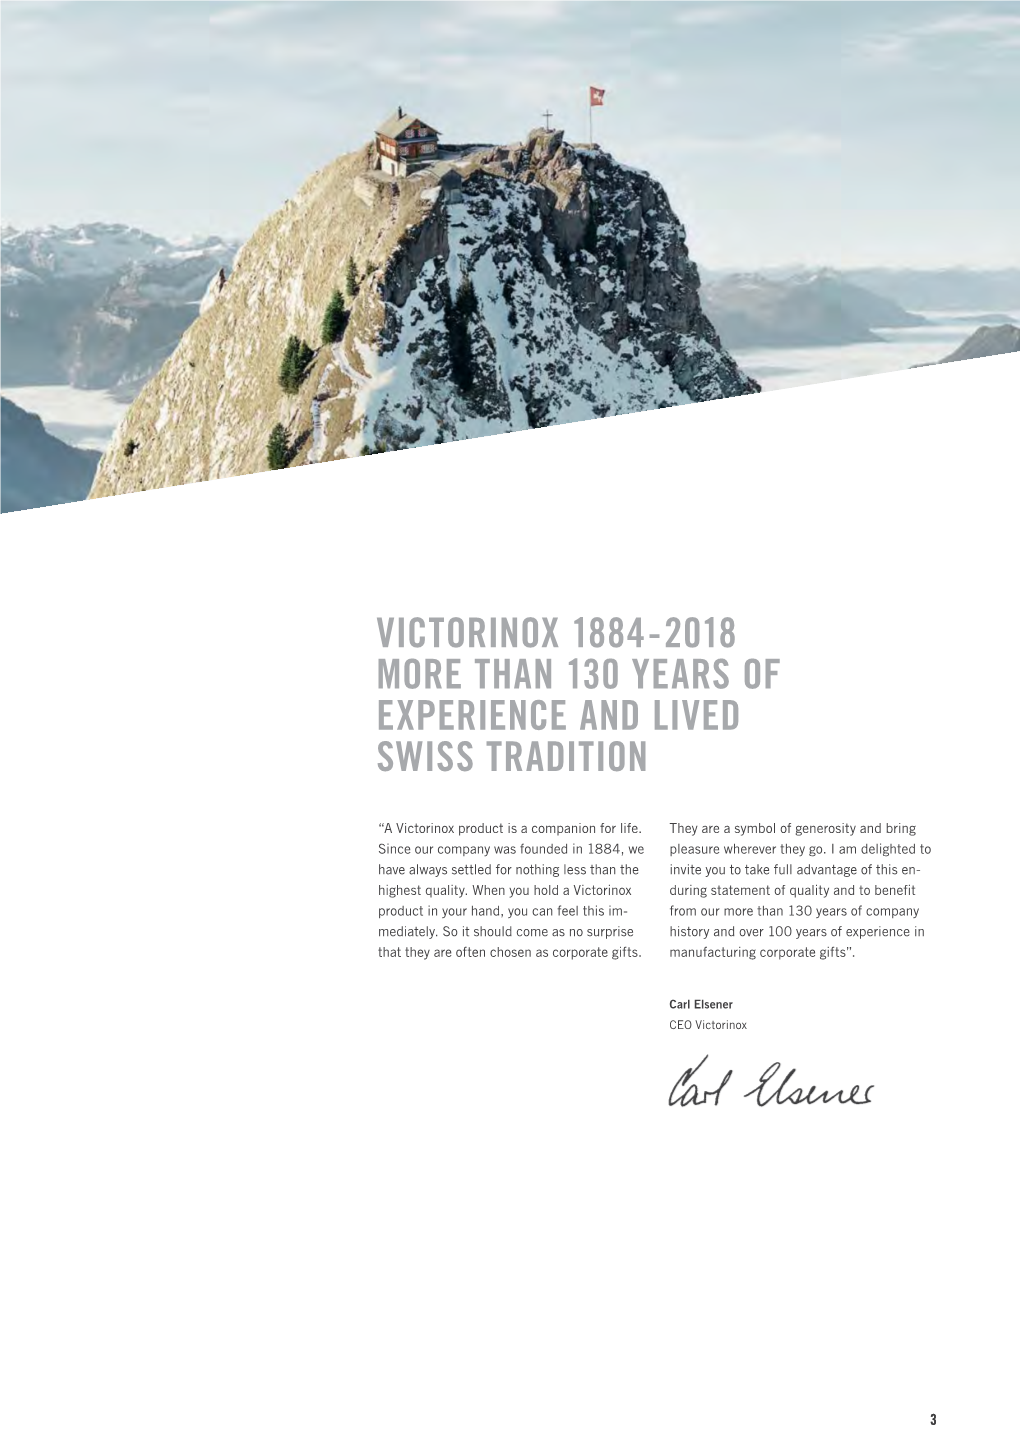 Victorinox 1884 - 2018 More Than 130 Years of Experience and Lived Swiss Tradition